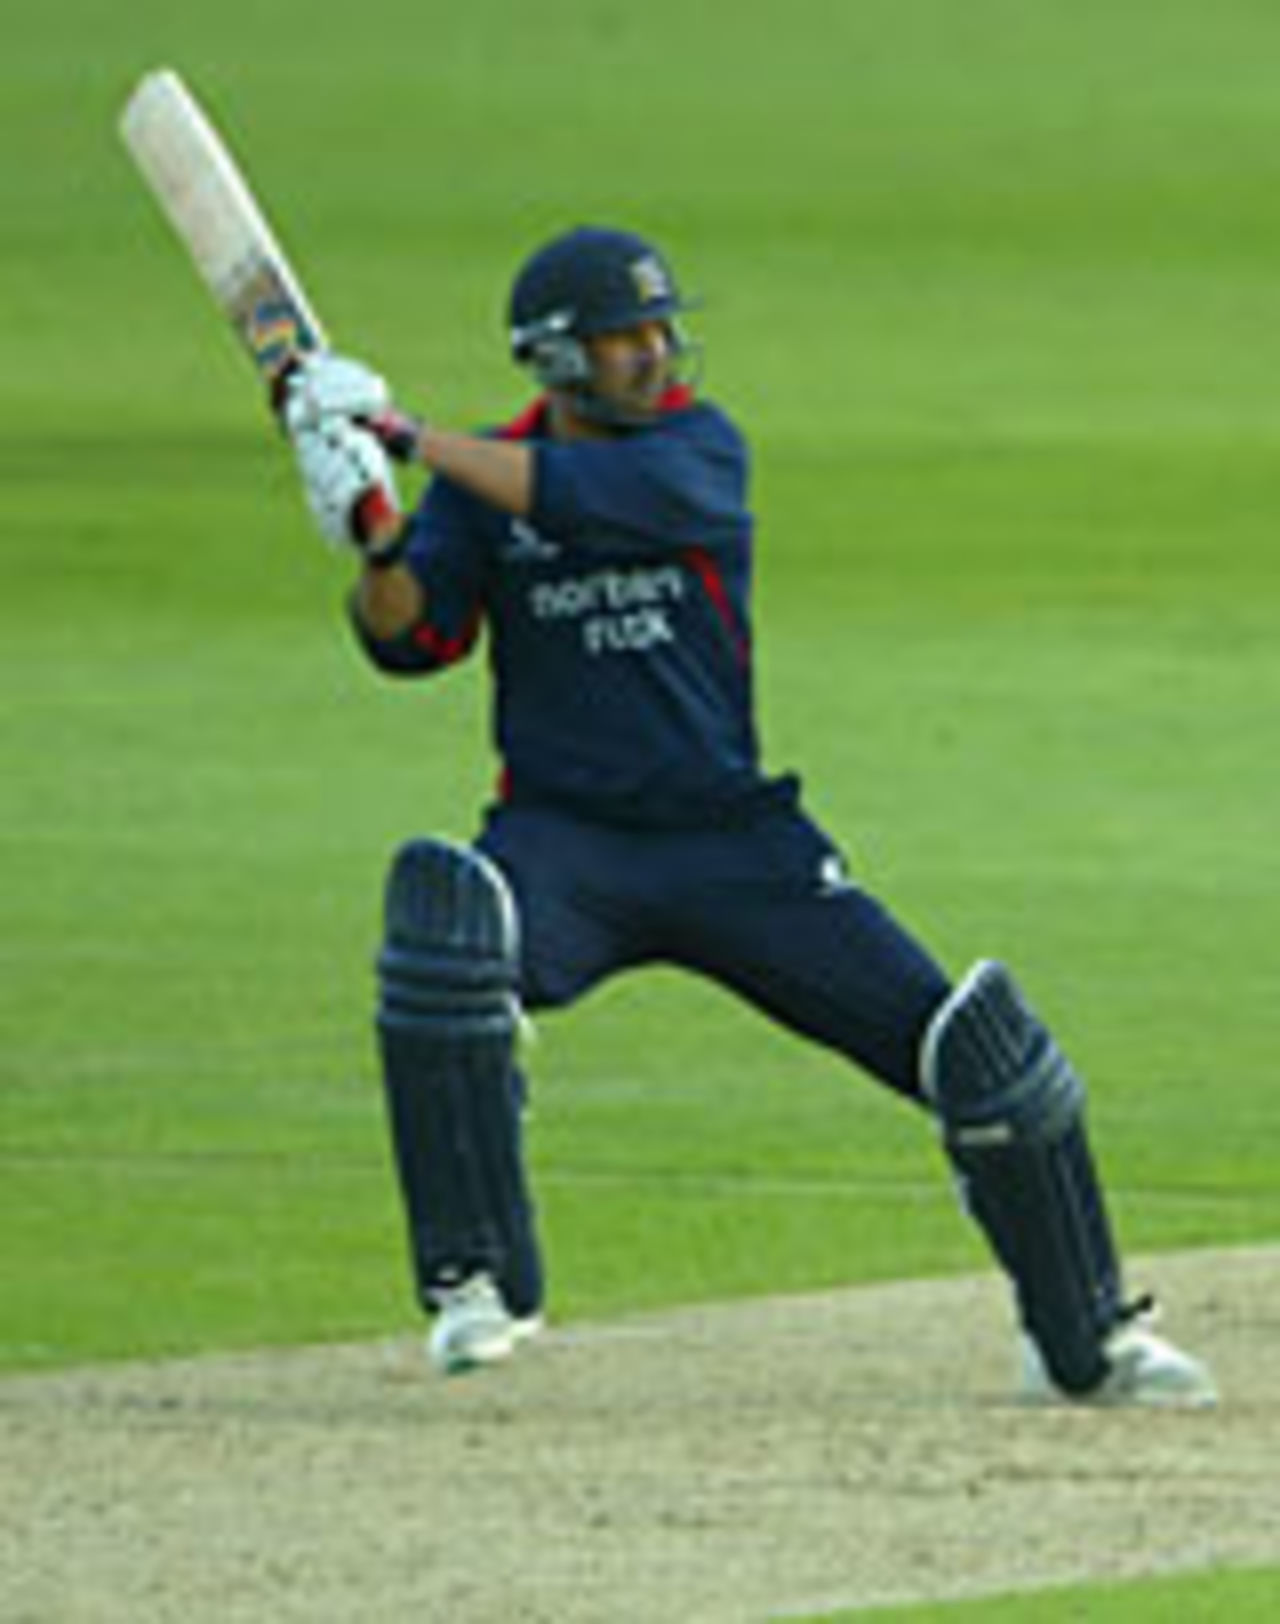 Paul Weekes hits out for Middlesex against Hampshire in a Twenty20 match at the Rose Bowl, July 13 2004